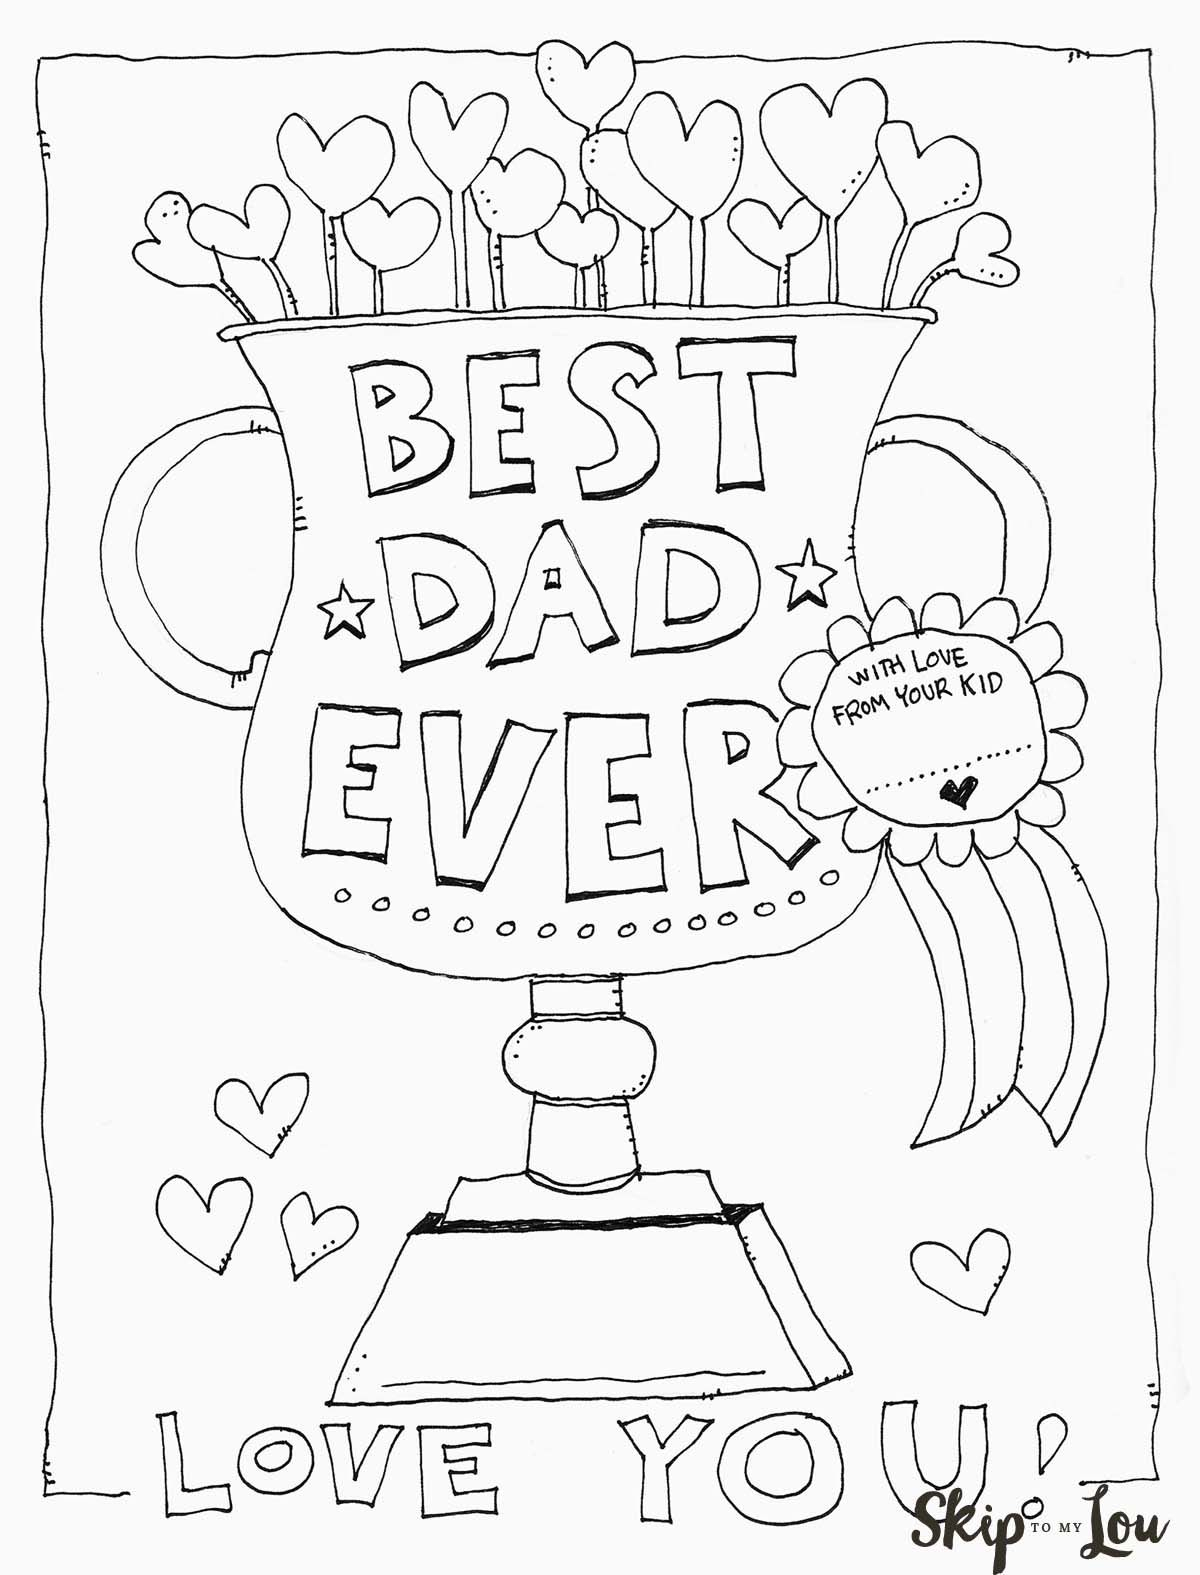 Dad Coloring Page For The Best Dad | Father&amp;#039;s Day | Pinterest | Kids - Free Printable Fathers Day Coloring Pages For Grandpa